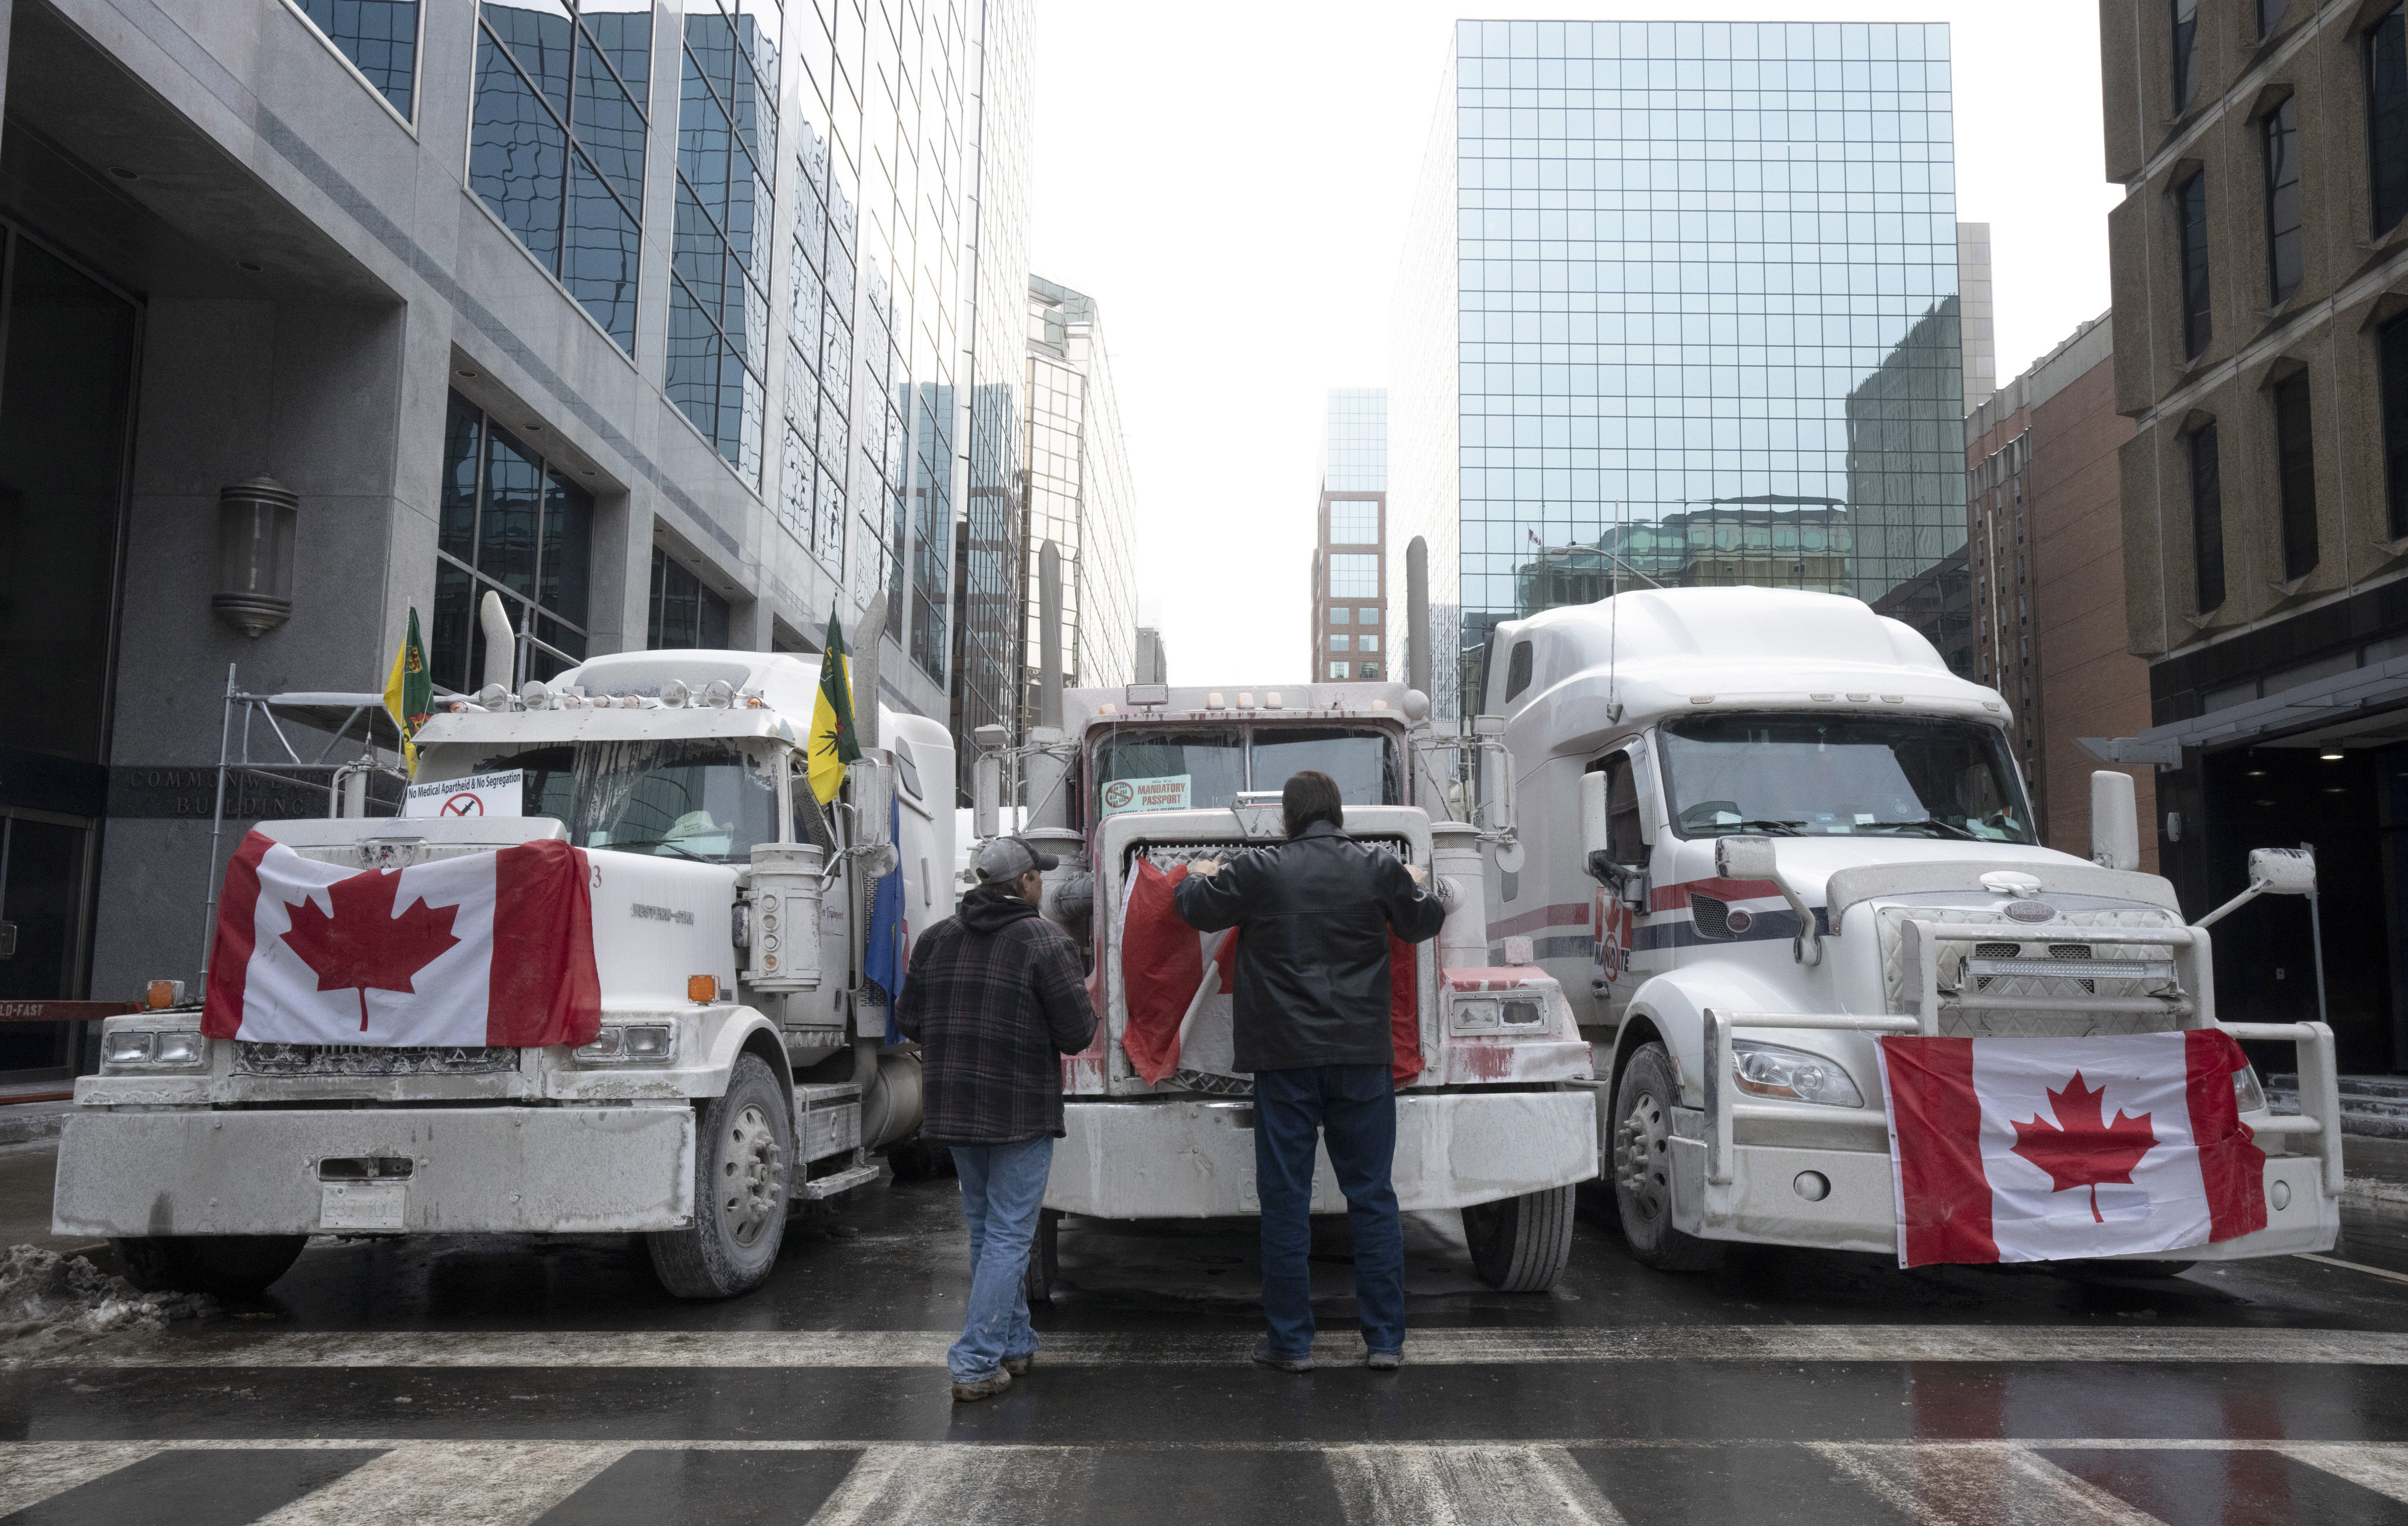 Truck drivers hang a Canadian flag on the front grill of a truck parked in downtown Ottawa, Ontario, near Parliament Hill. Photo: AP